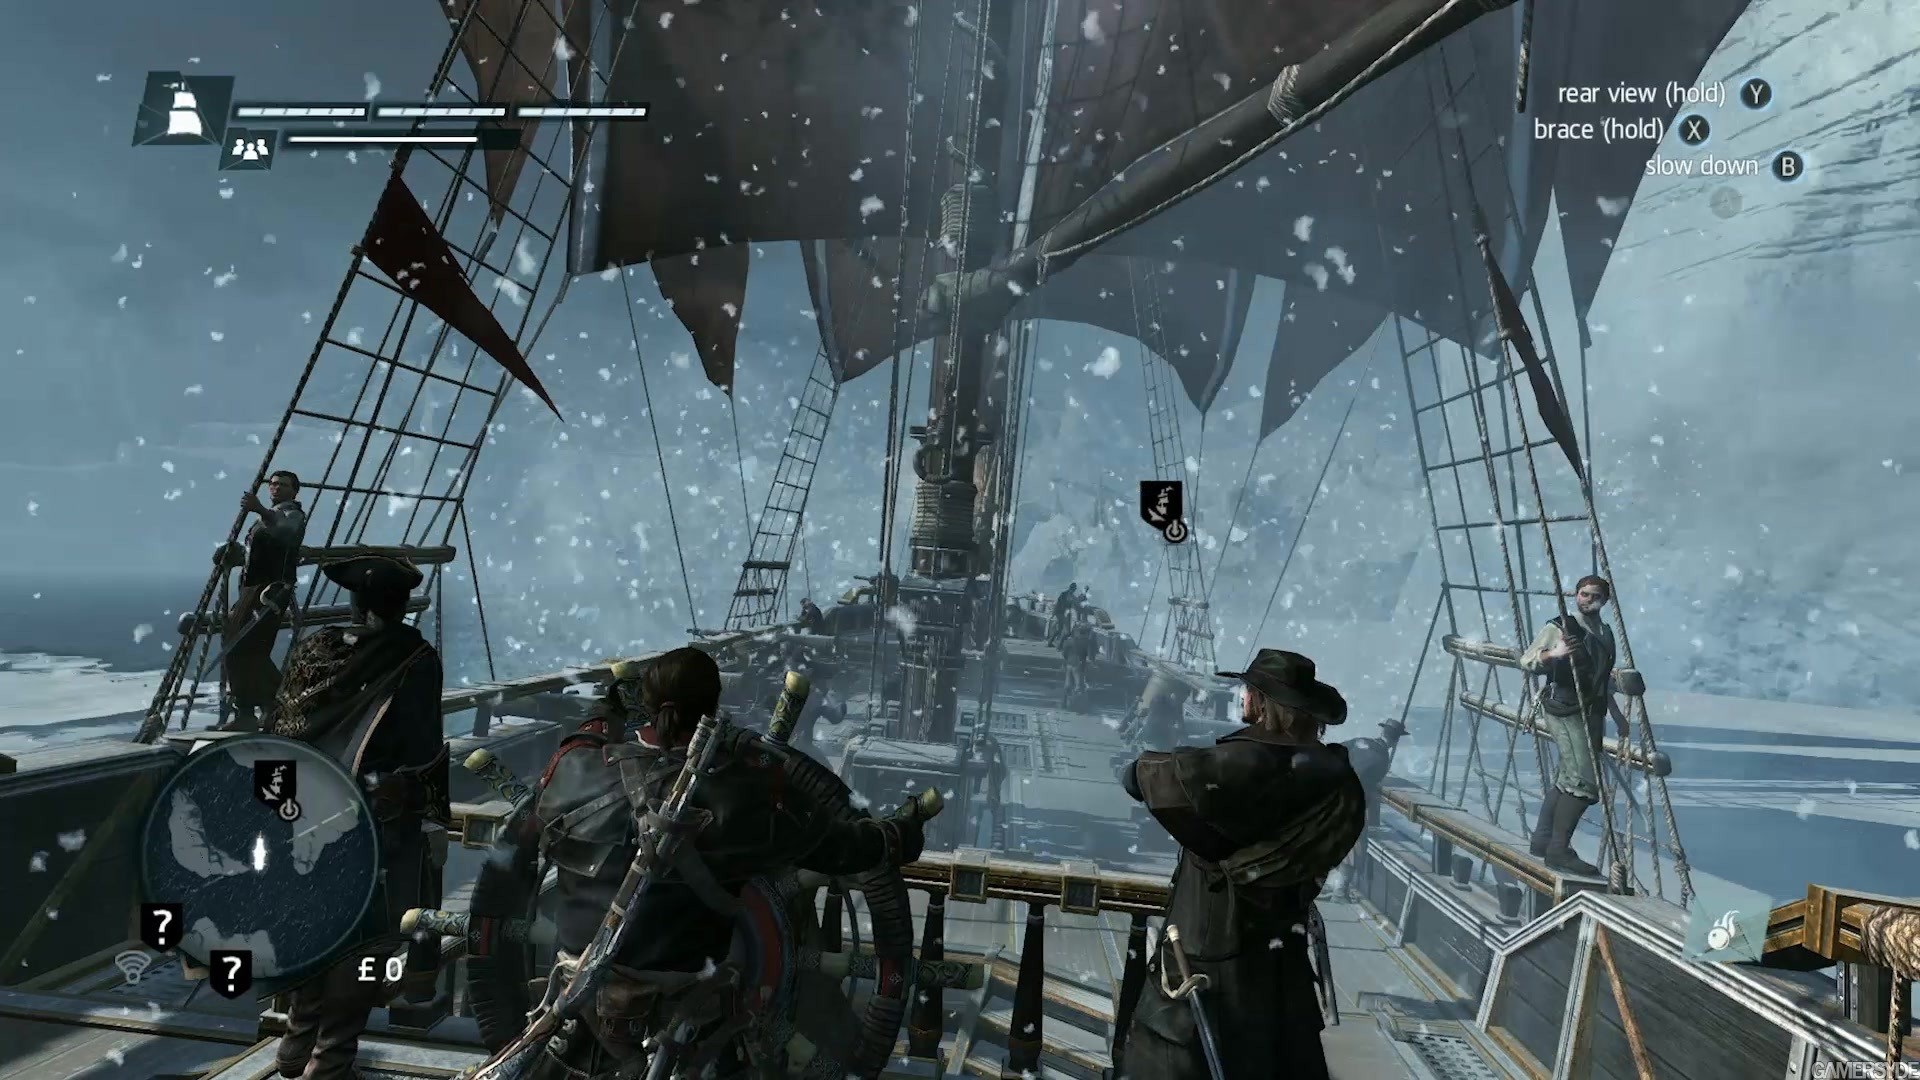 Assassin'S Creed Rogue Wallpapers